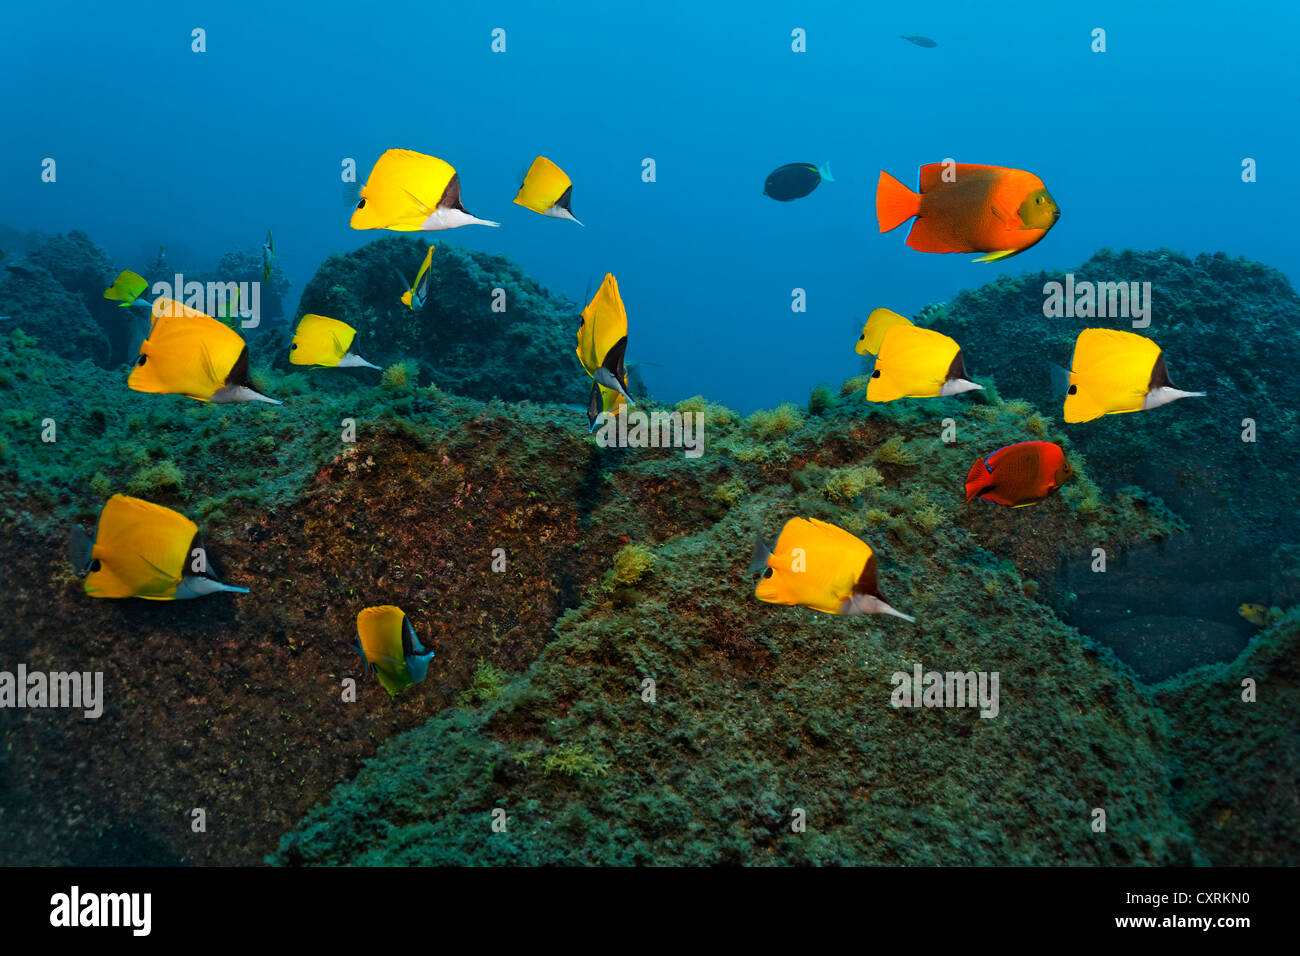 Shoal of yellow longnose butterflyfish (Forcipiger flavissimus) and Clarion angelfish (Holacanthus clarionensis) swimming above Stock Photo